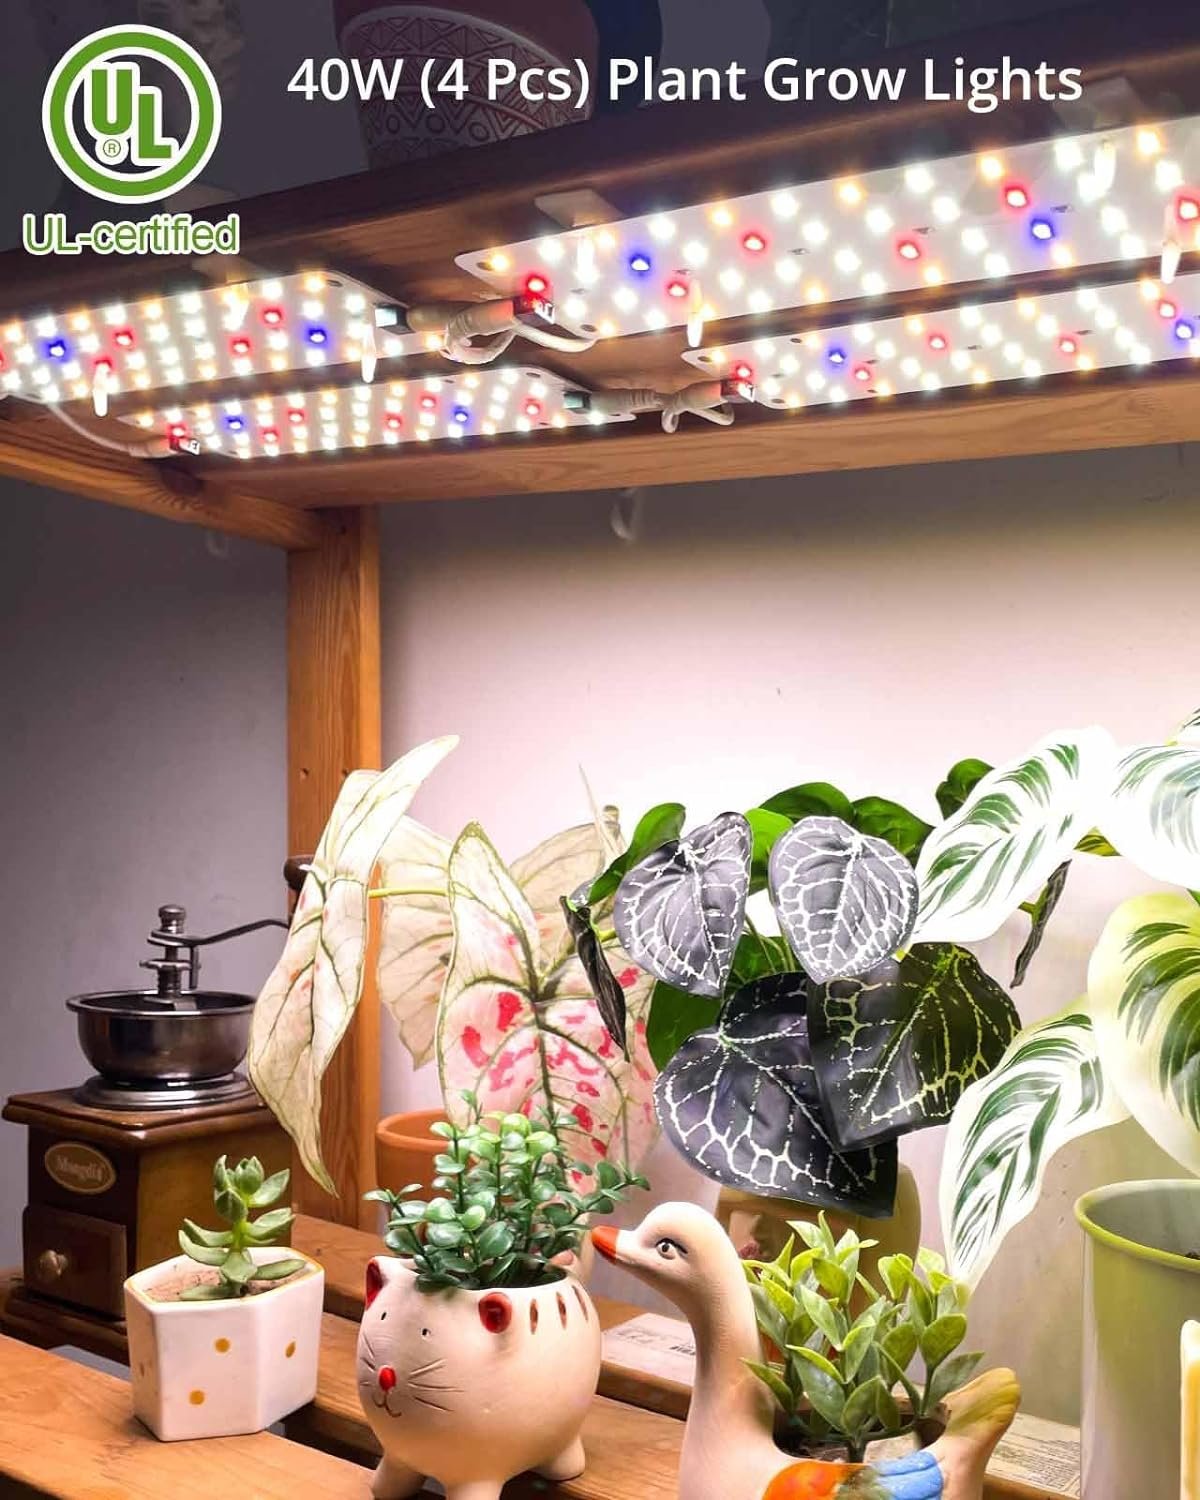 DOMMIA Grow Lights, Full Spectrum 12W(120W Equiv) for Indoor Plants, 84 LEDs Sunlike Plant Grow Light with On/Off Switch for Seed Starting, Hydroponics, Succulents  More, Easy to Assemble